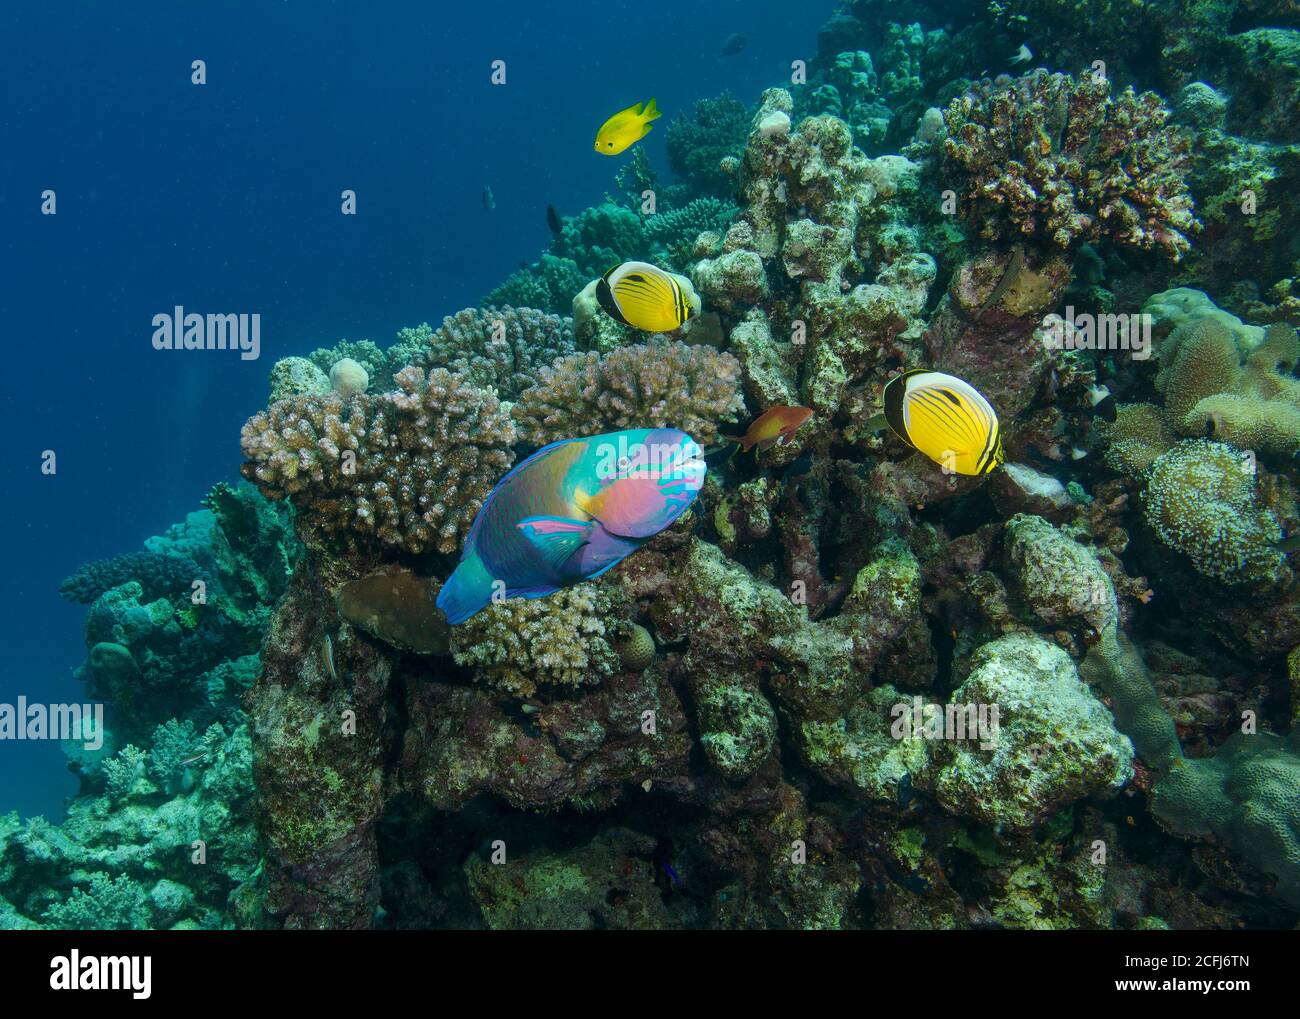 Rusty parrotfish, Scarus ferrugineus, with Blacktail or Exquisite butterflyfish, Chaetodon austriacus, on coral reef, Hamata, Red Sea, Egypt Stock Photo